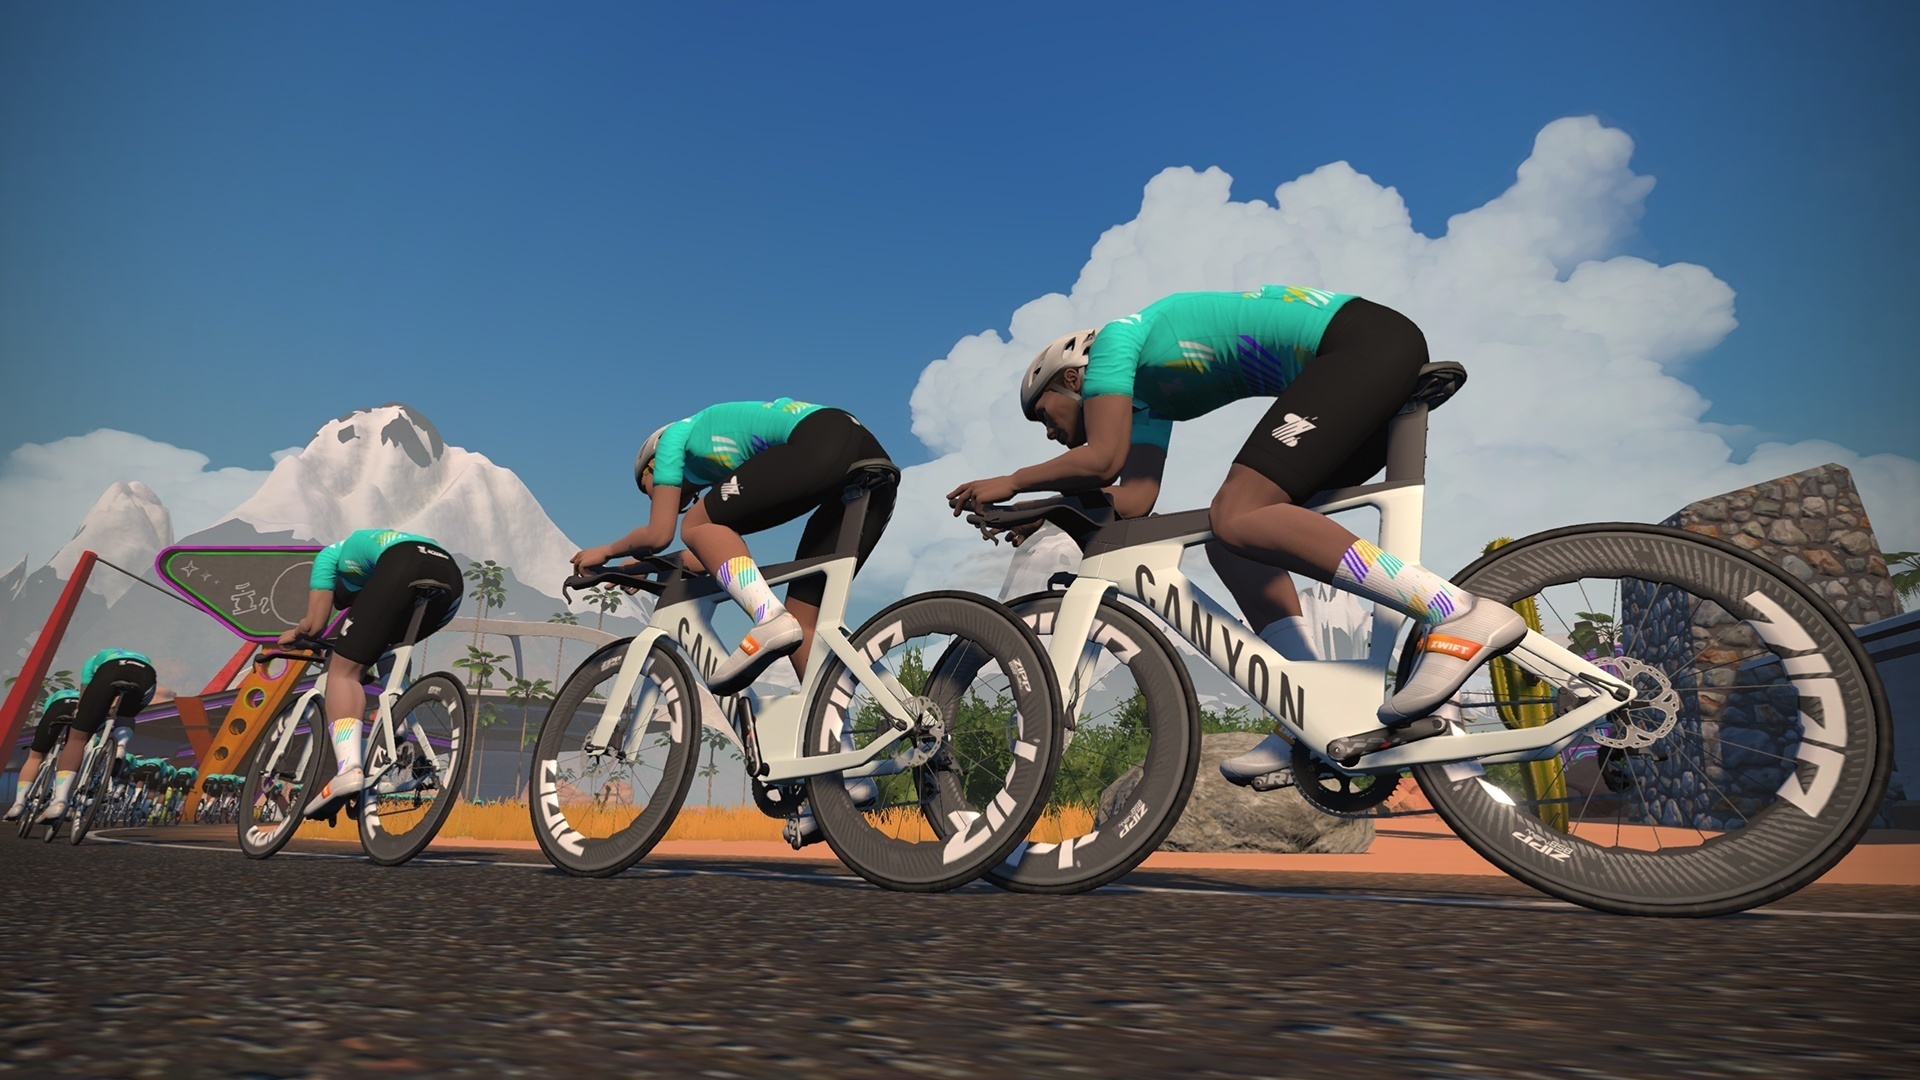 Zwift Academy Triathlon Returns for 2022 with New Support from Canyon, SRAM and ZIPP